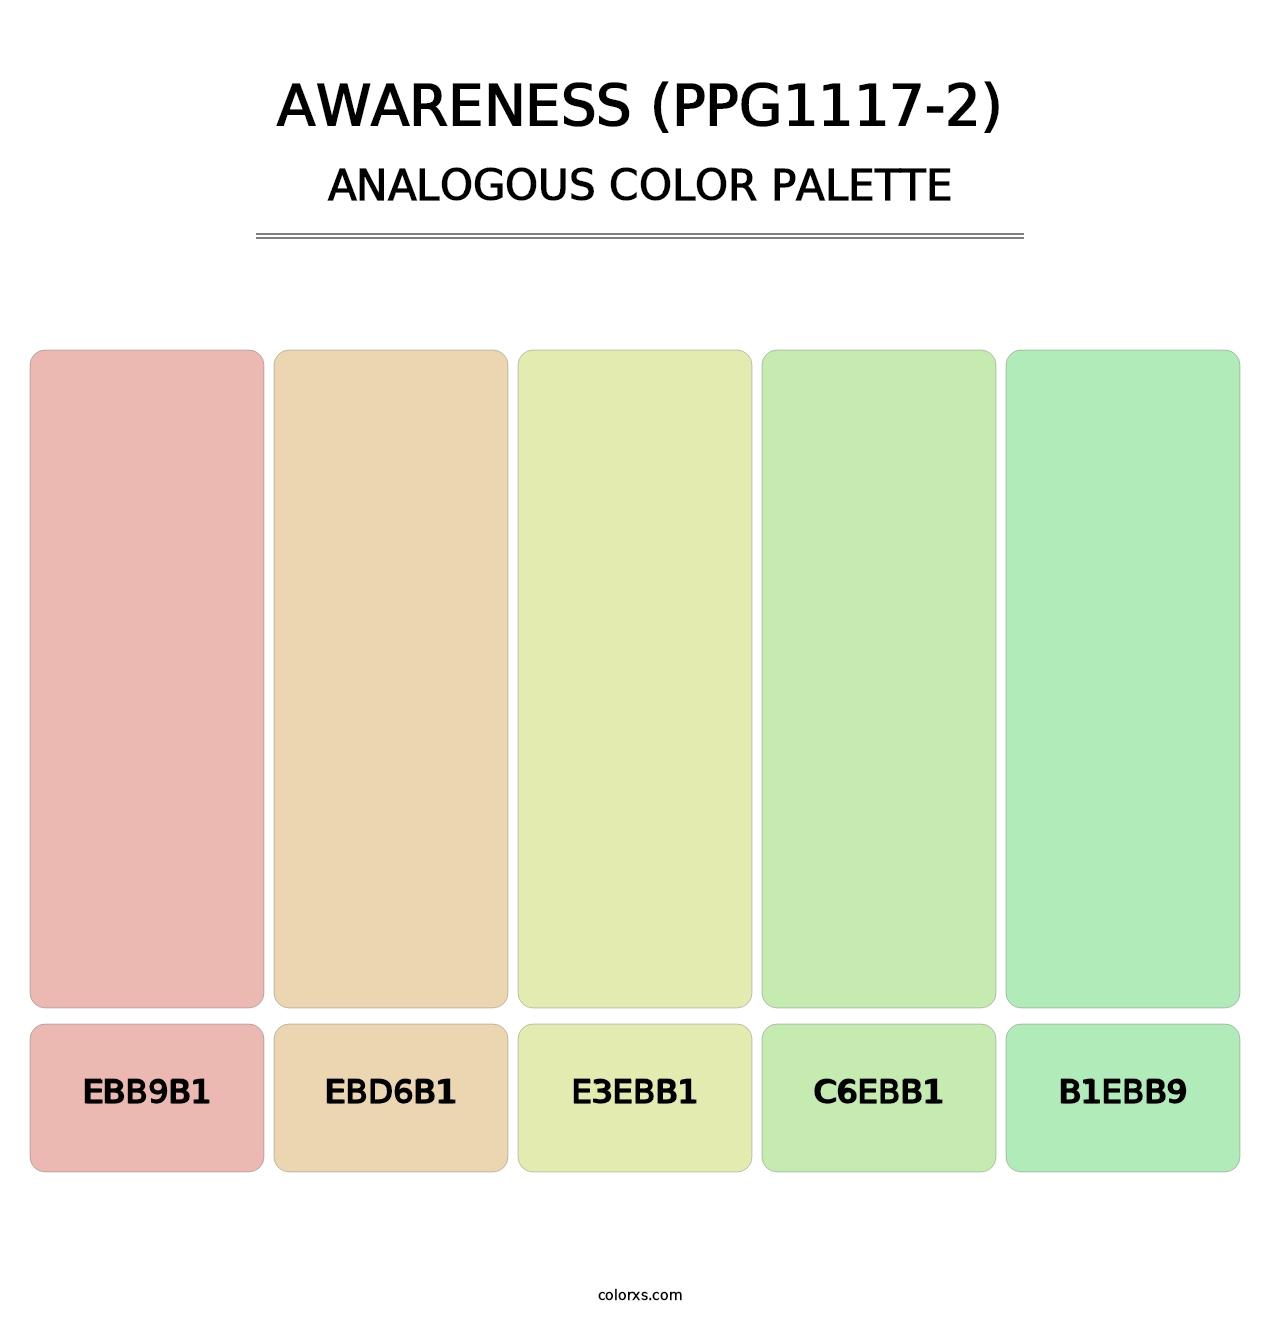 Awareness (PPG1117-2) - Analogous Color Palette